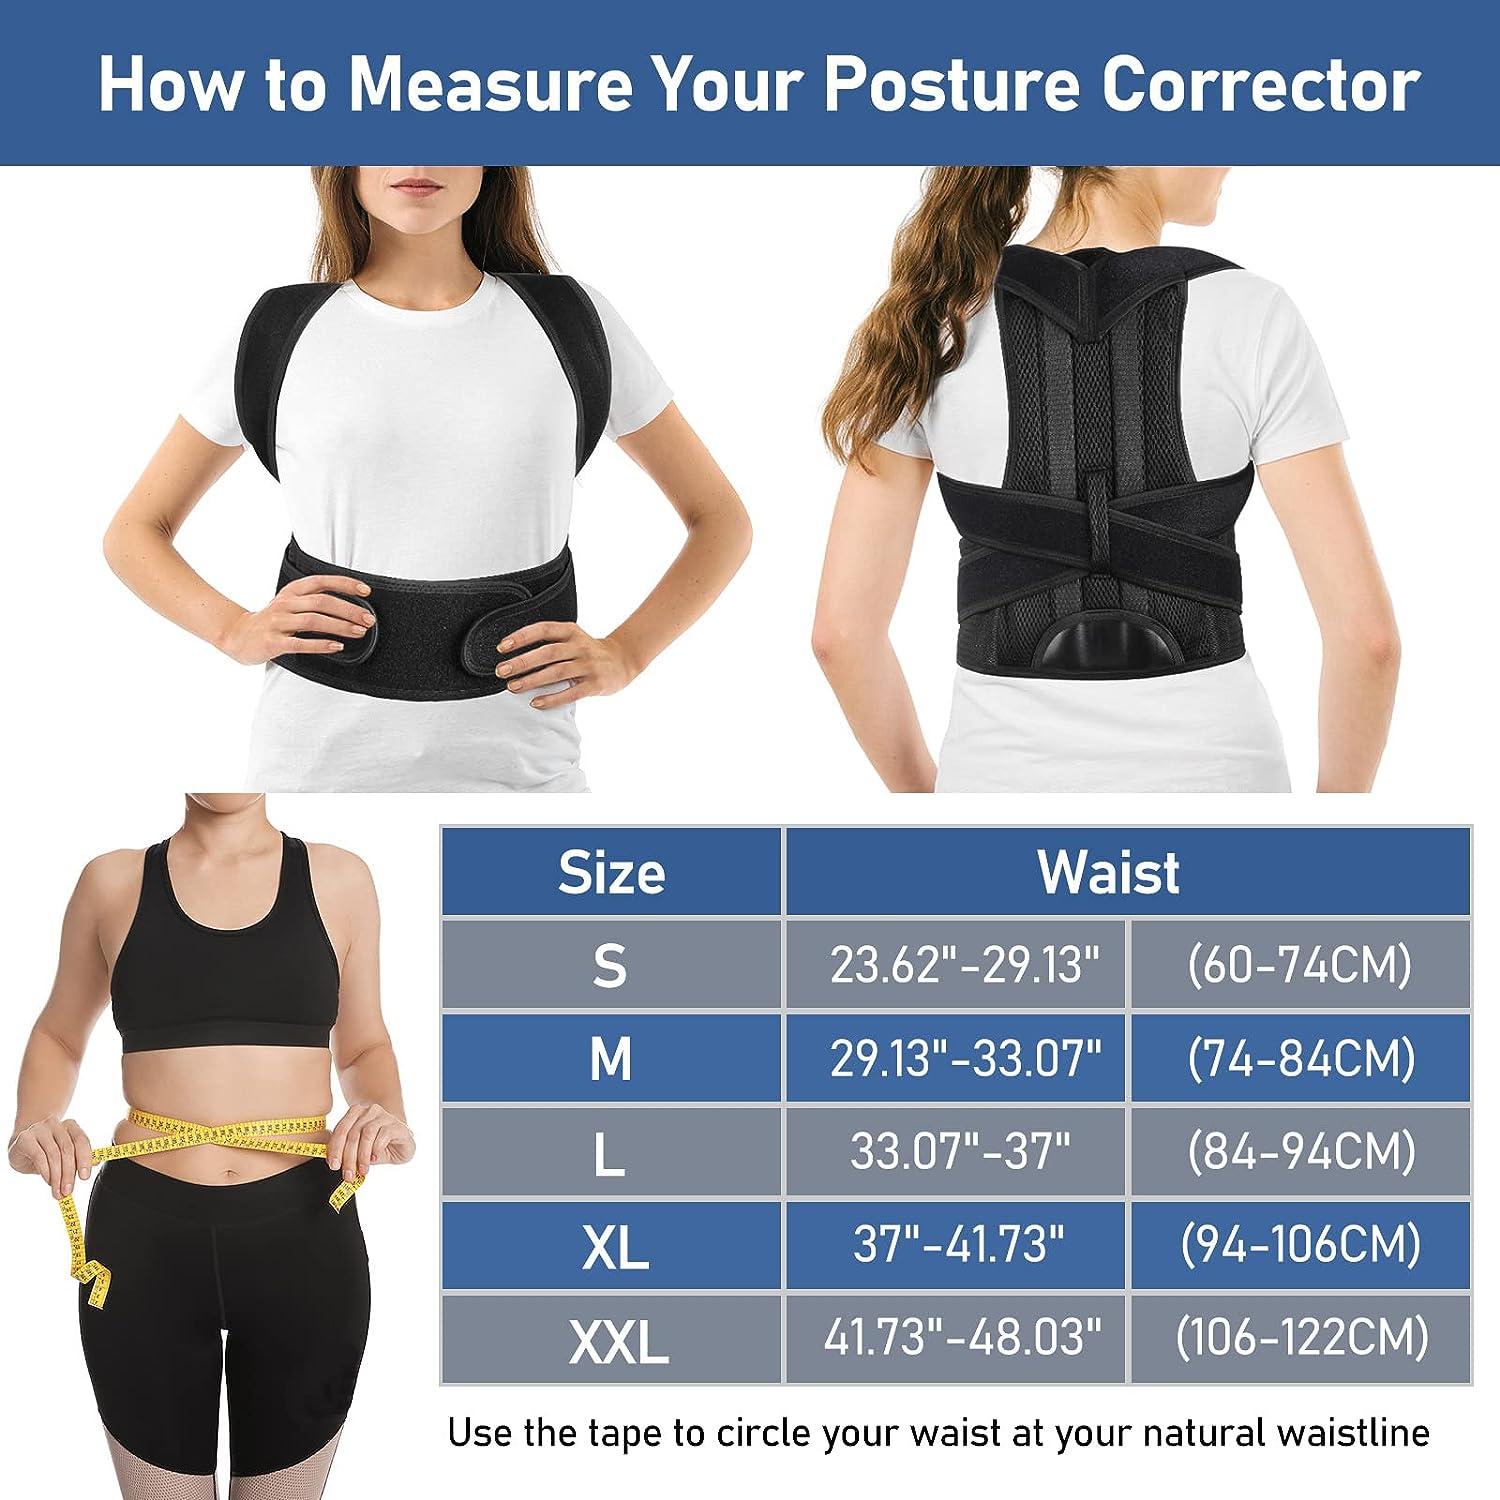 The Natural Posture - Posture support for your upper back